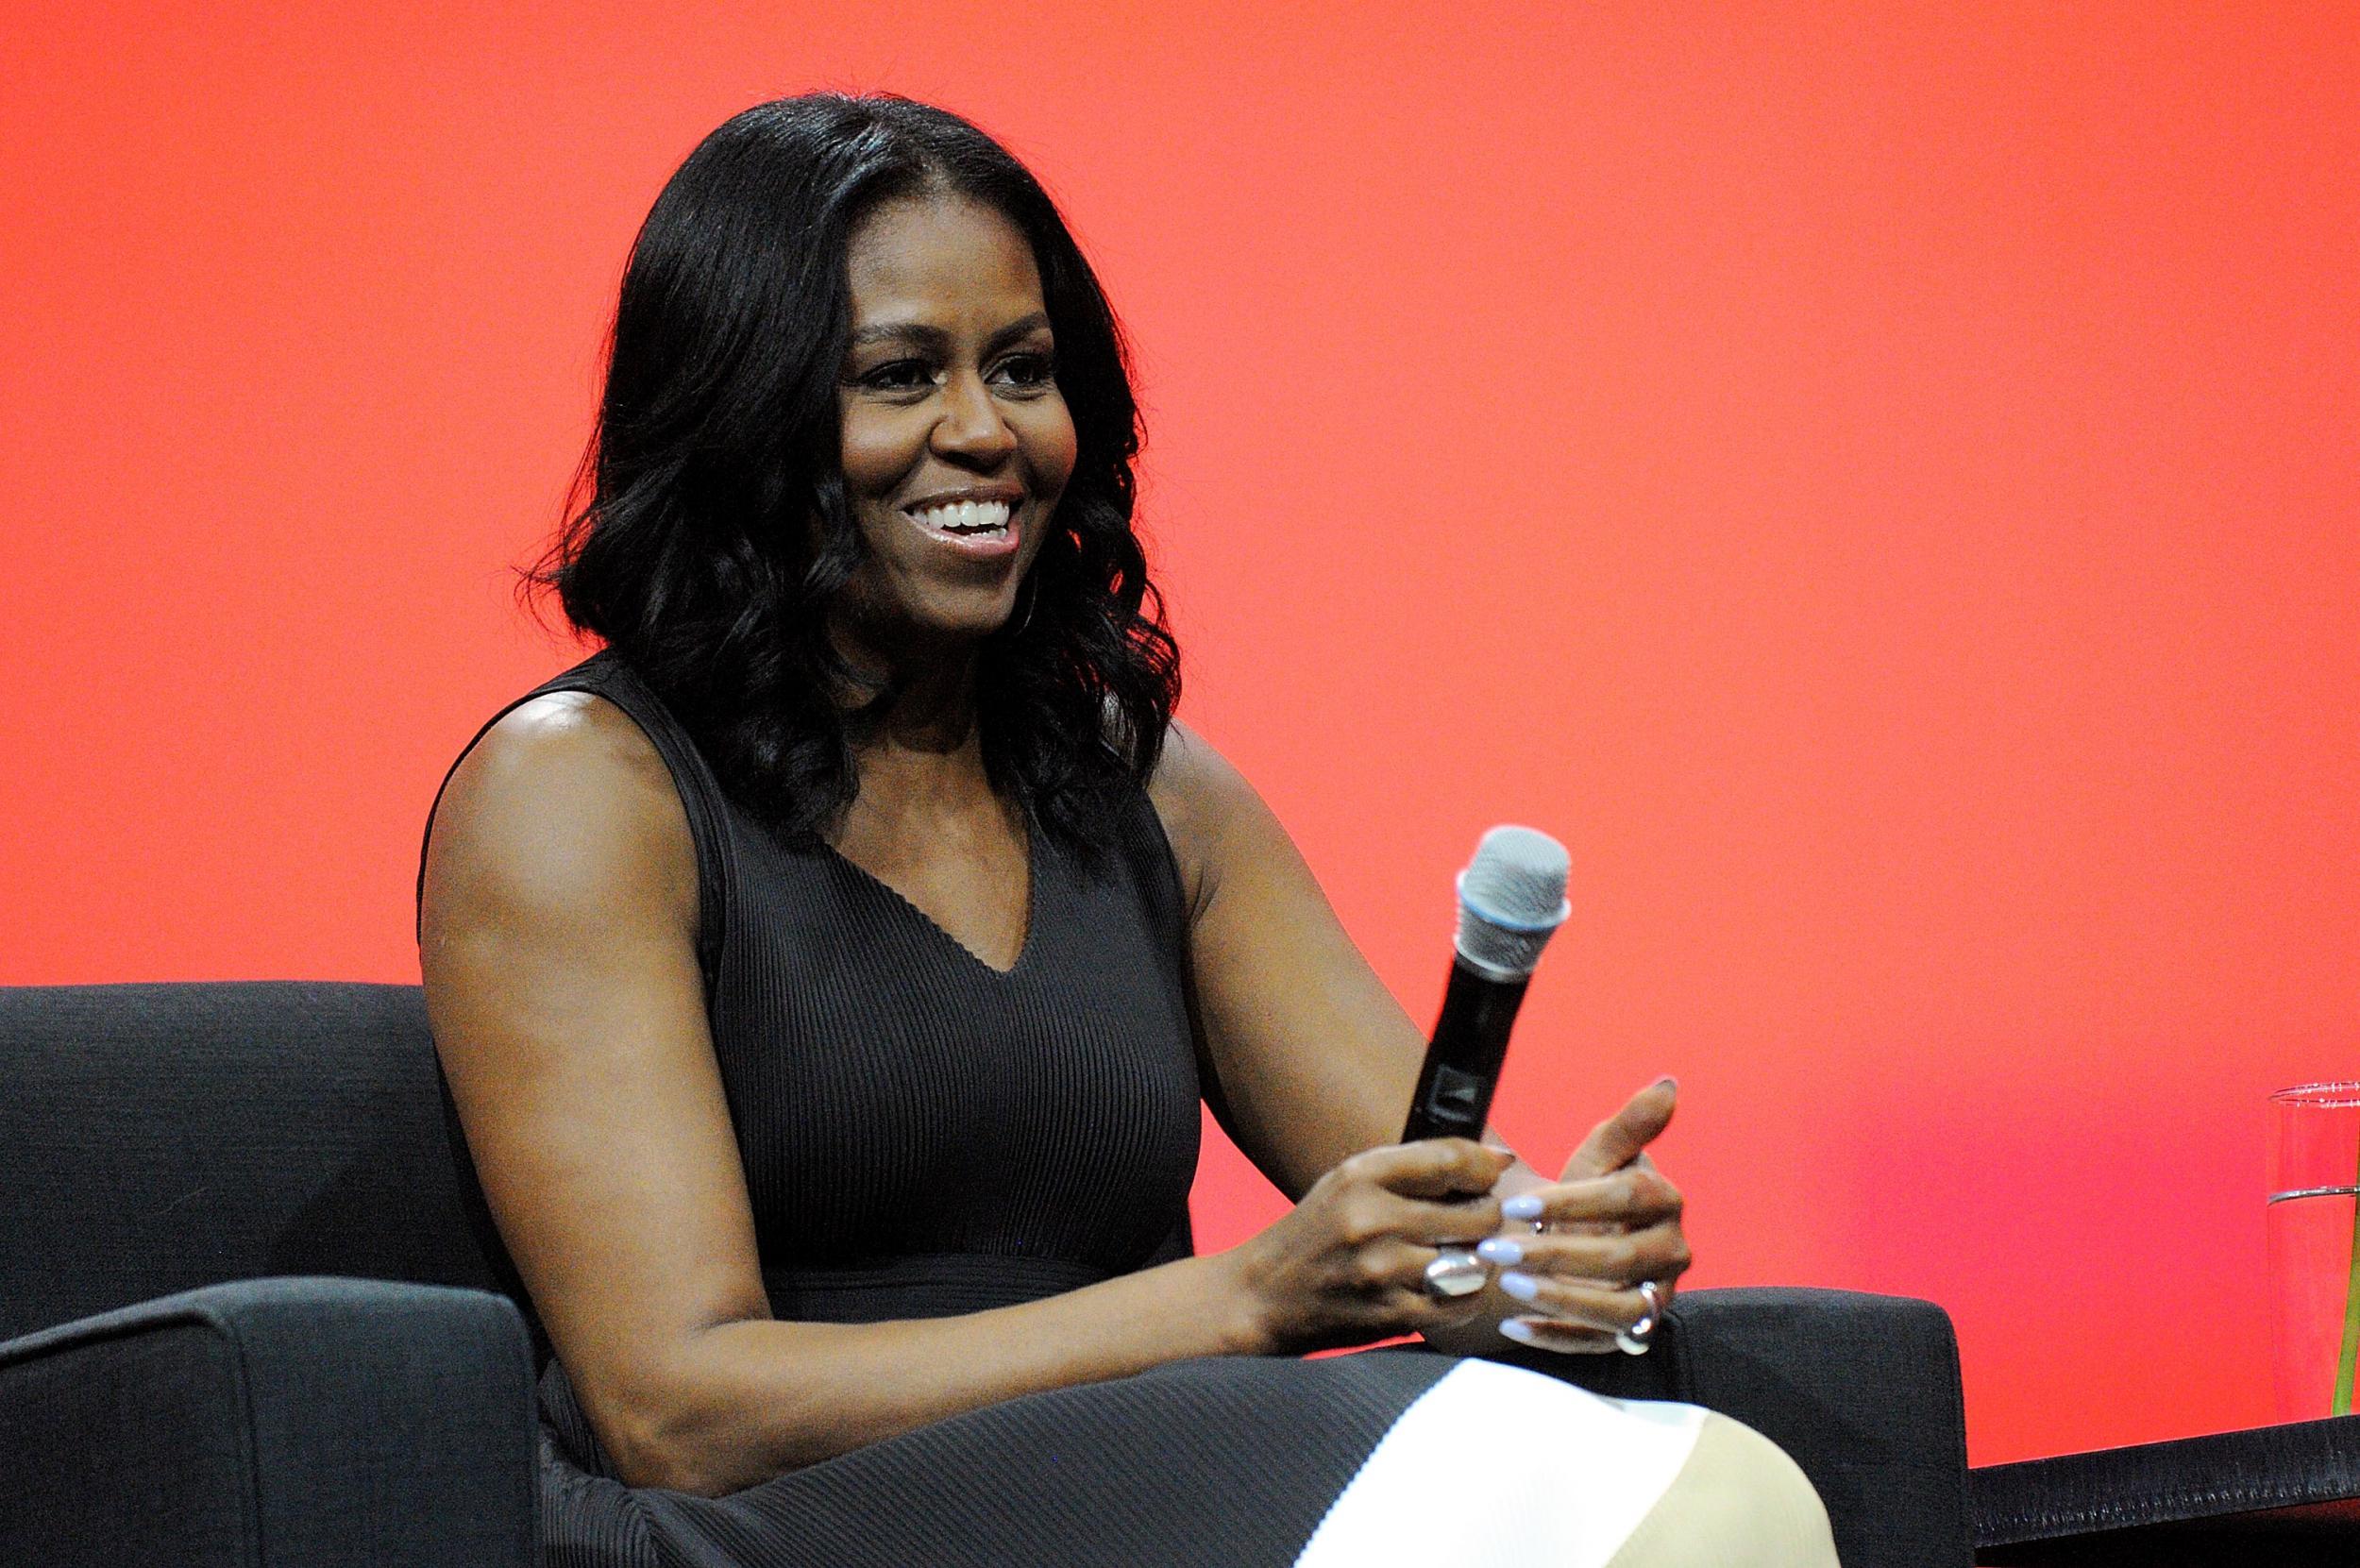 Michelle Obama smiles during a conversation at the AIA Conference on Architecture 2017